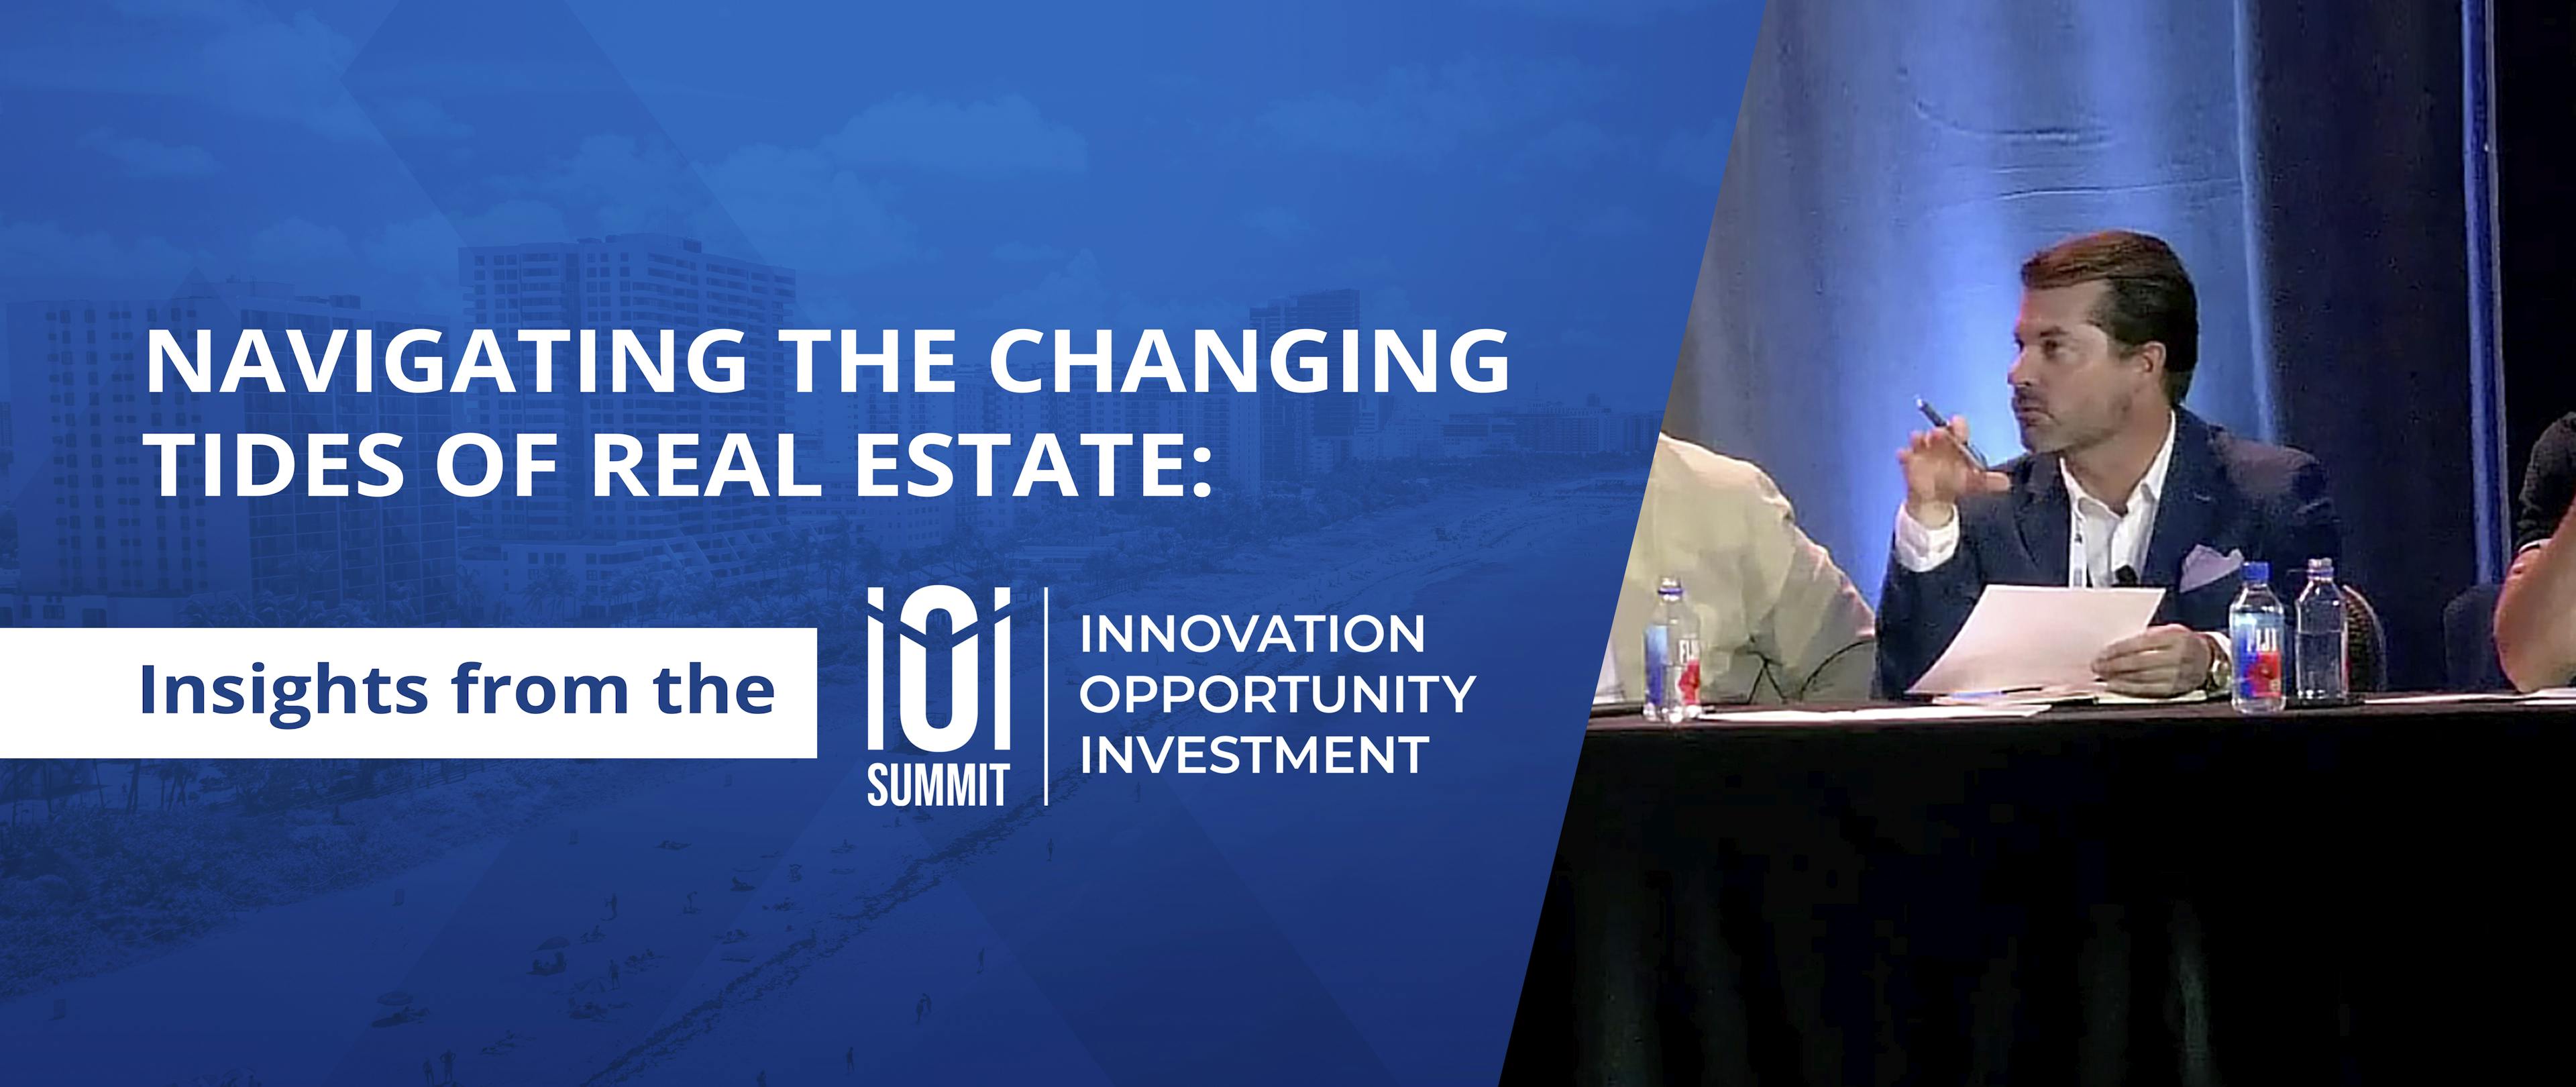 Navigating the Changing Tides of Real Estate: Insights from the 2023 iOi Summit header image